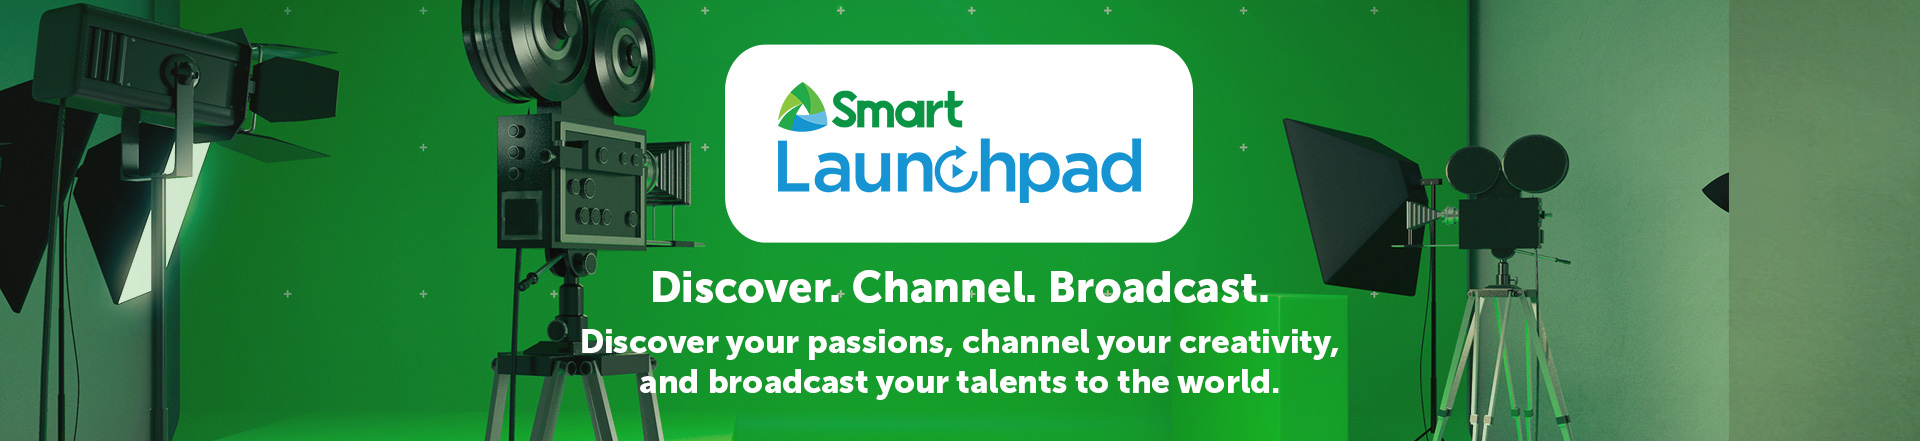 smart pages launchpad 1